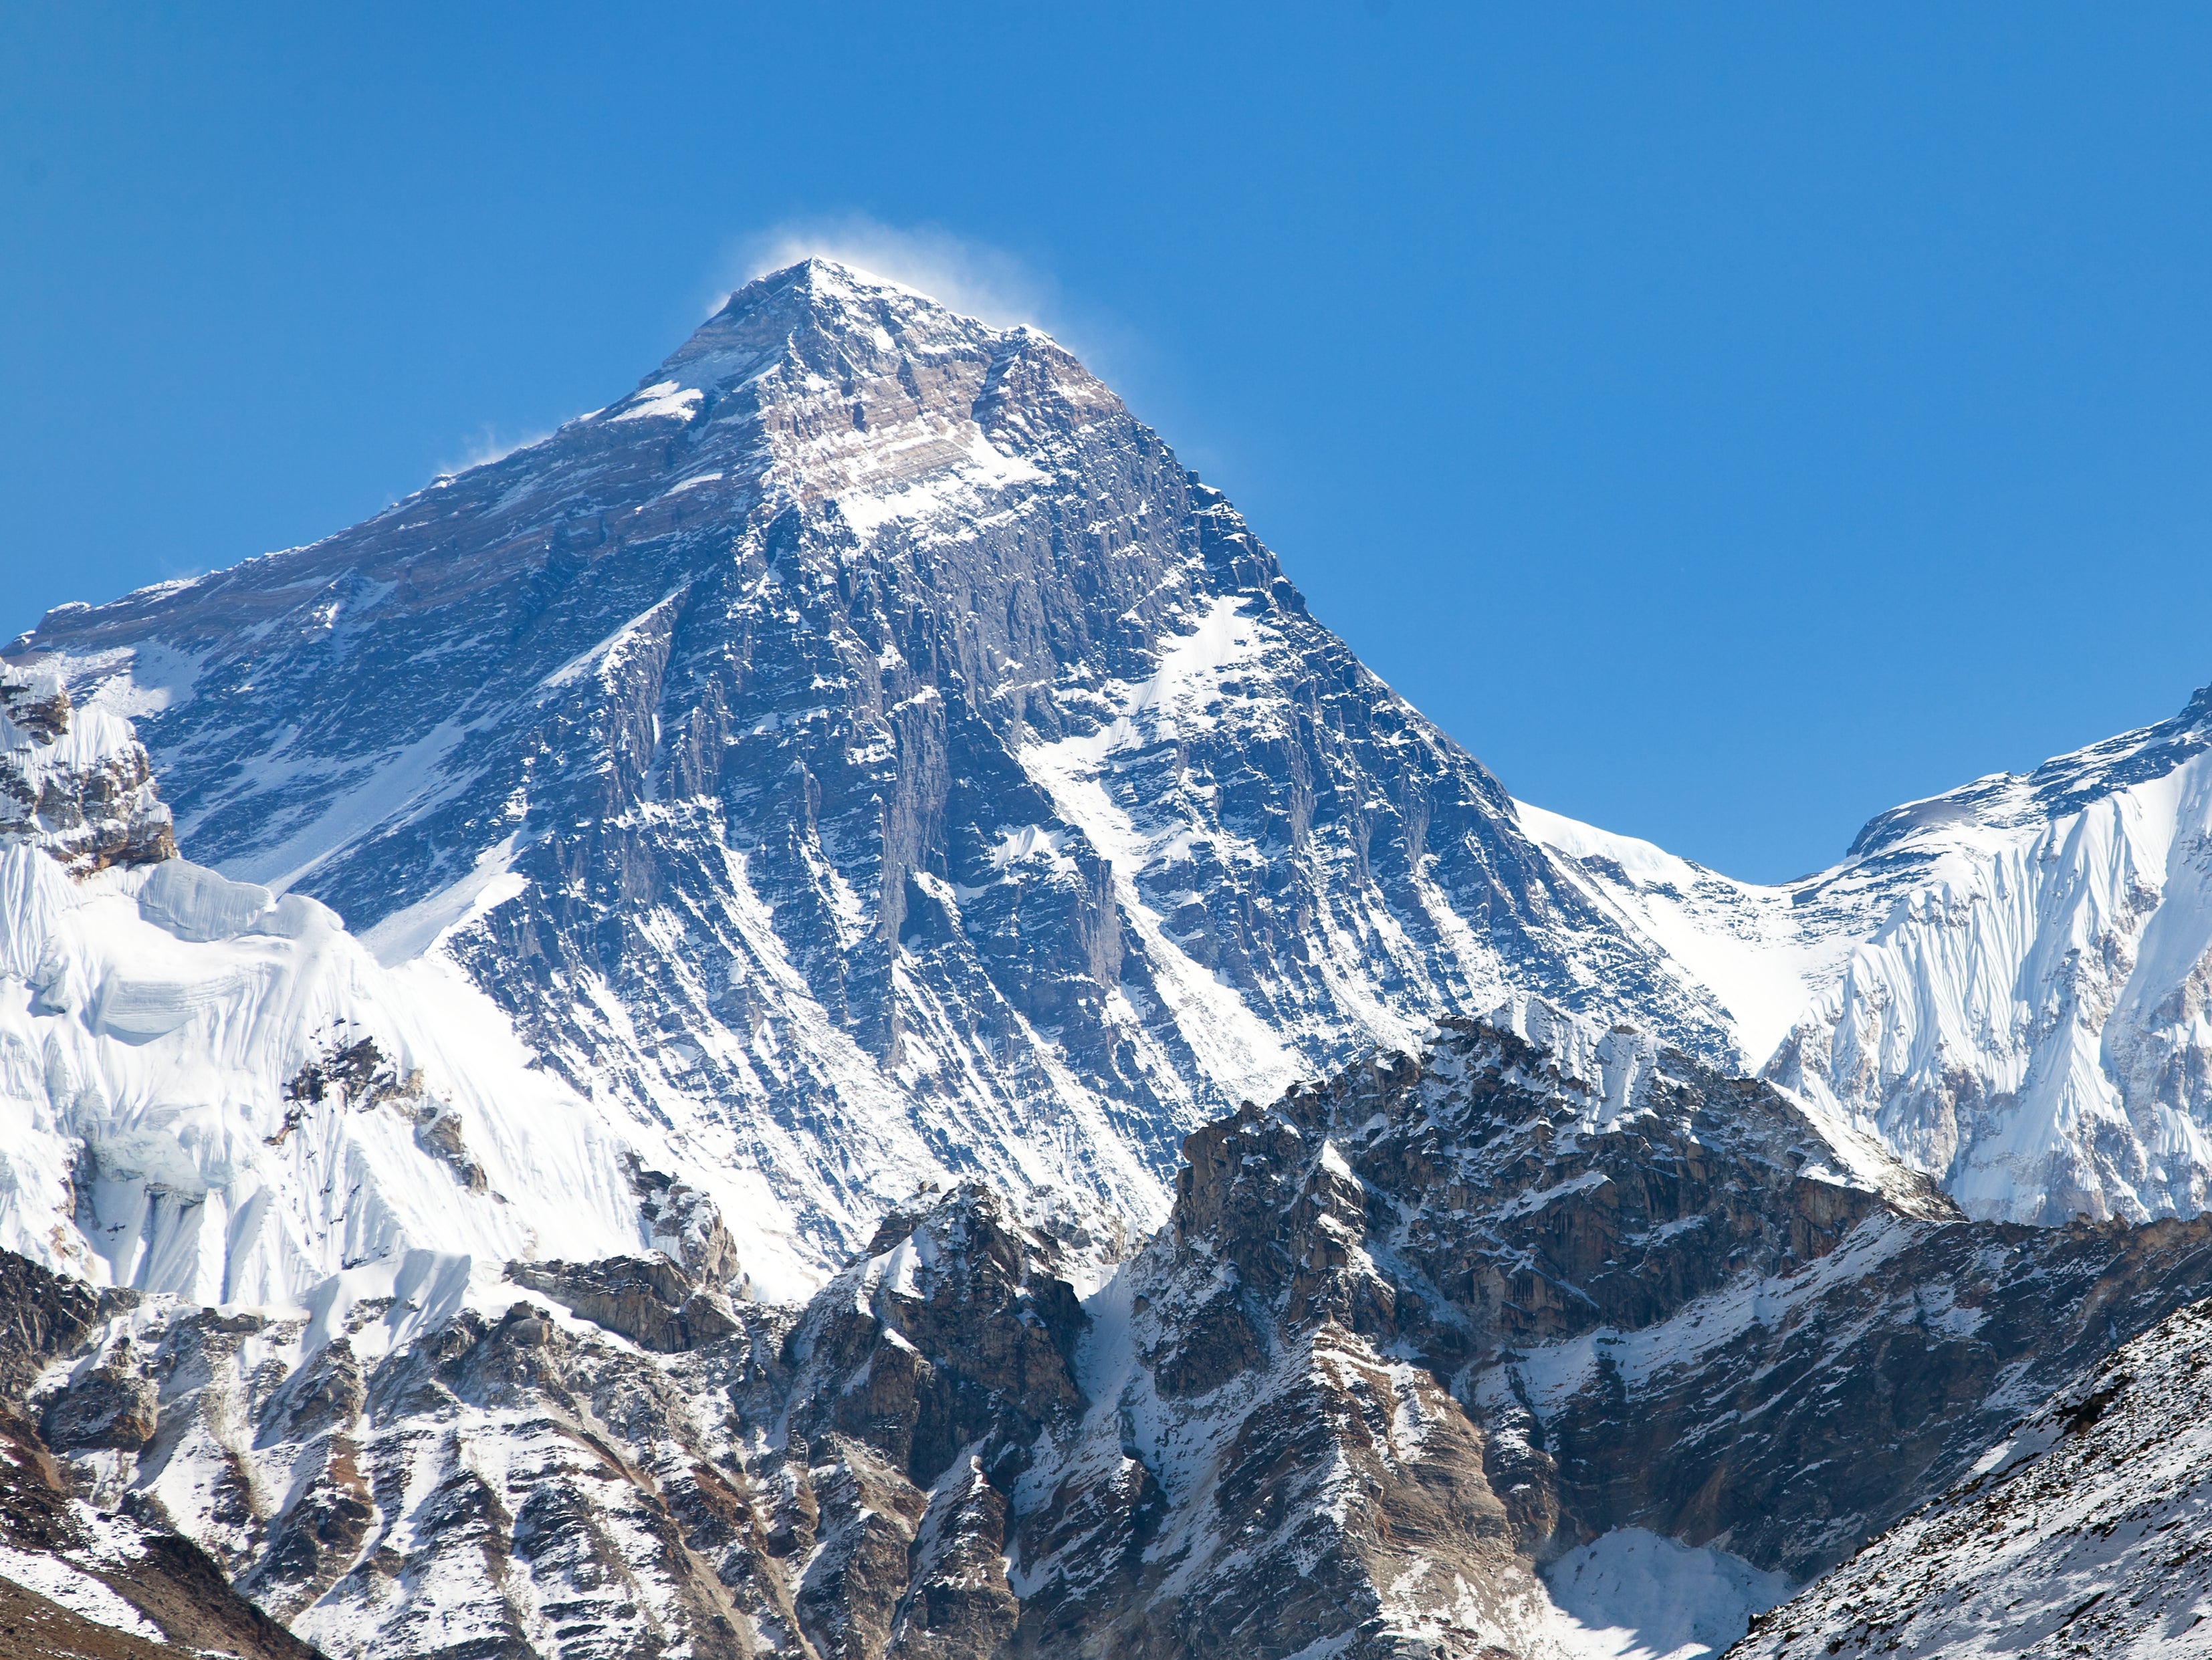 Mount Everest’s summit, the wind scoured southwest face and snowy pass of the South Col under deep blue skies in the Himalaya mountains